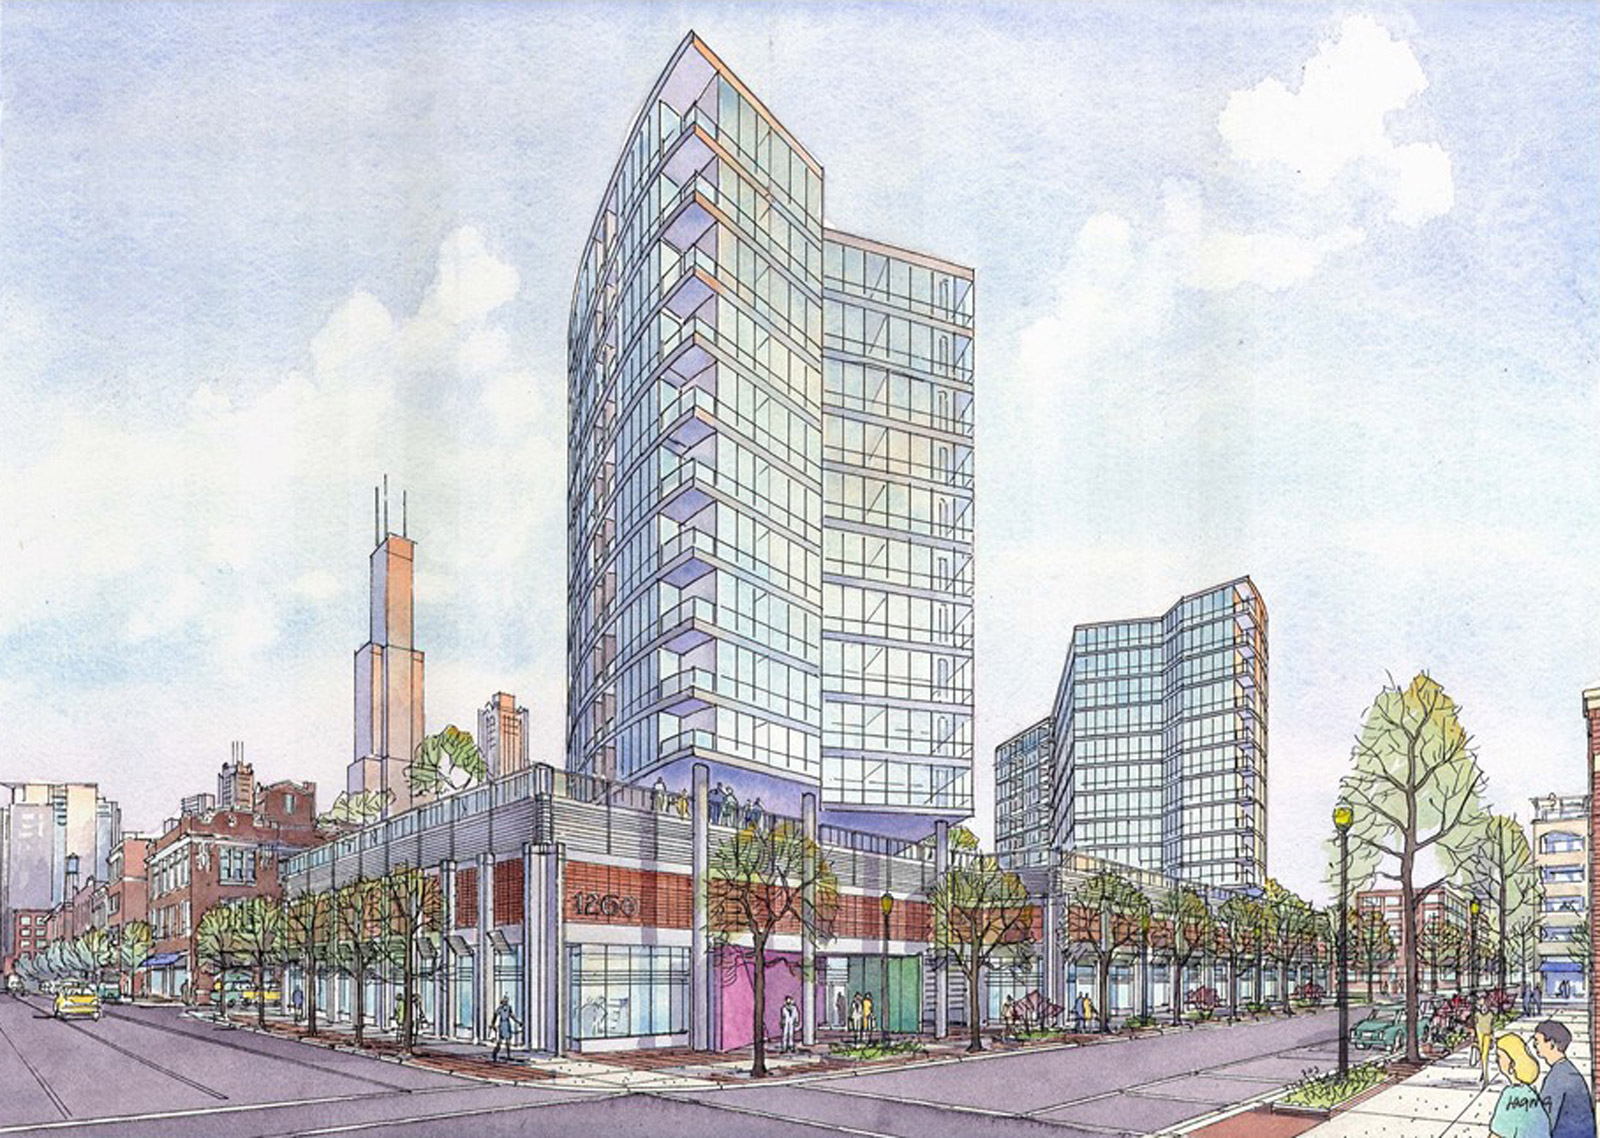 Building Proposal on Washington Ave. - Chicago, IL (Antunovich and Assoc., Chicago, IL)